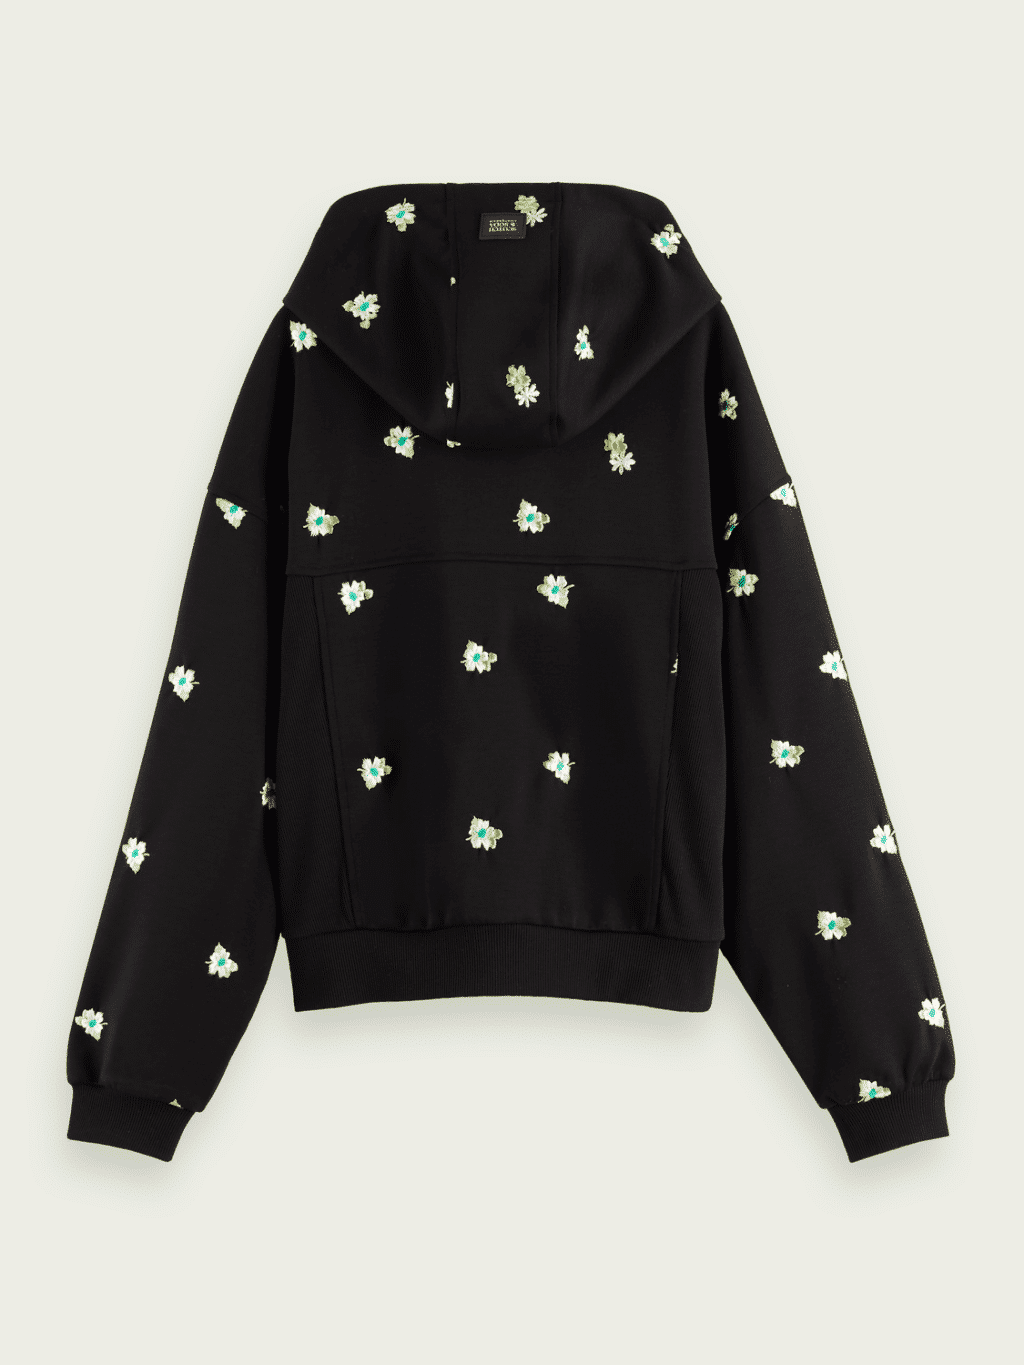 Clothing SCOTCH & SODA EMBROIDERED HOODIE